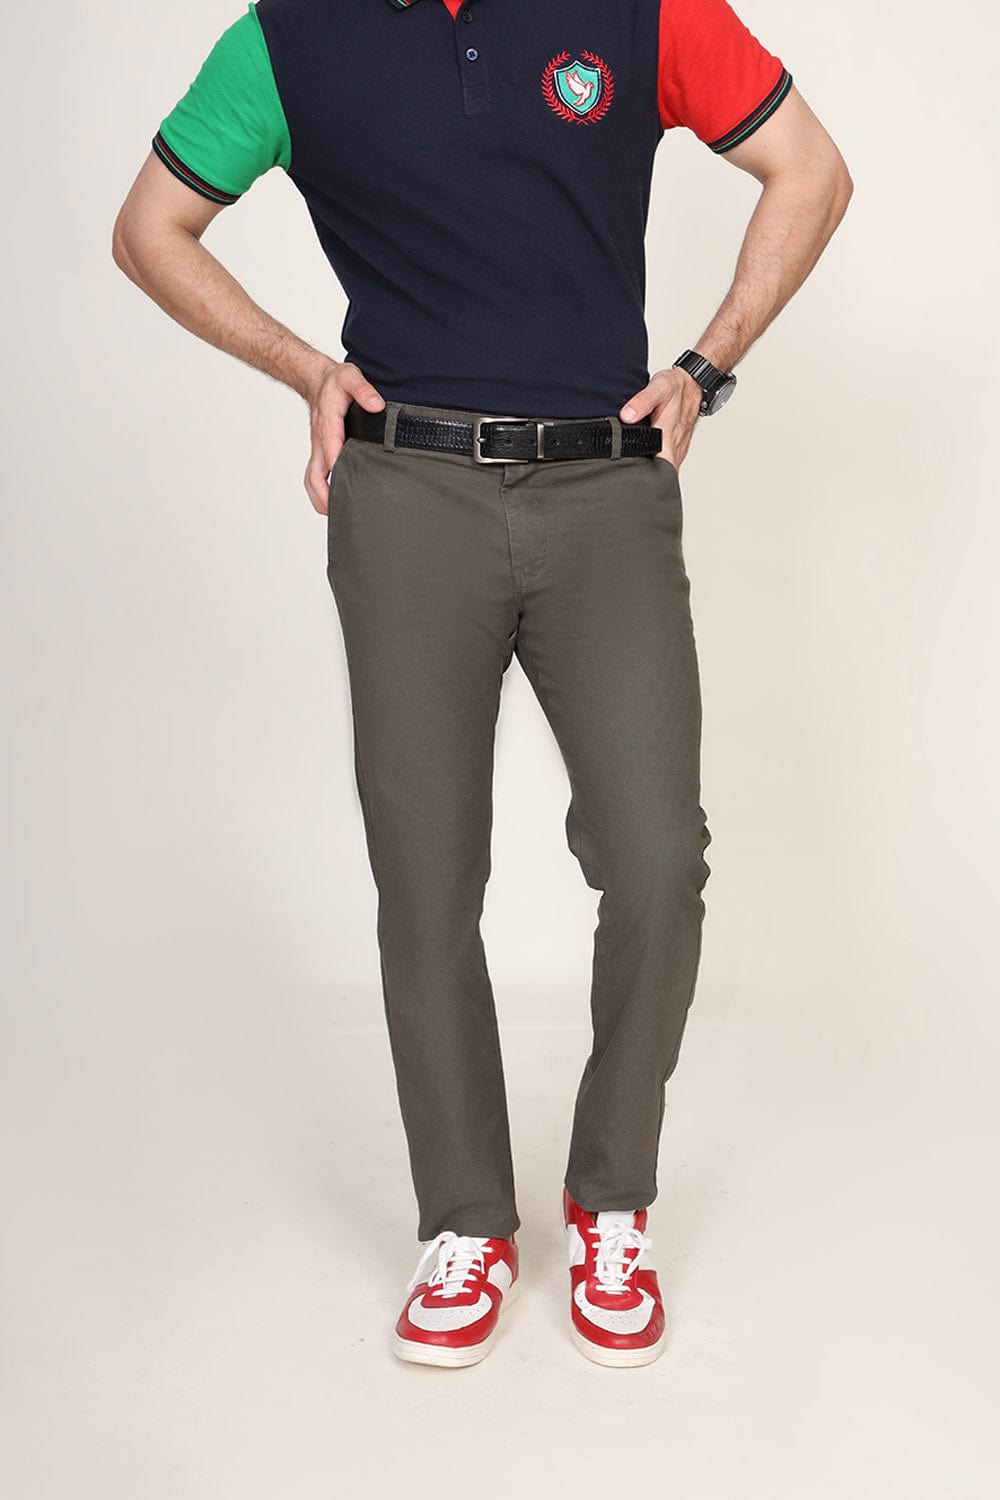 Hope Not Out by Shahid Afridi Men Chino Olive Green Textured Chino